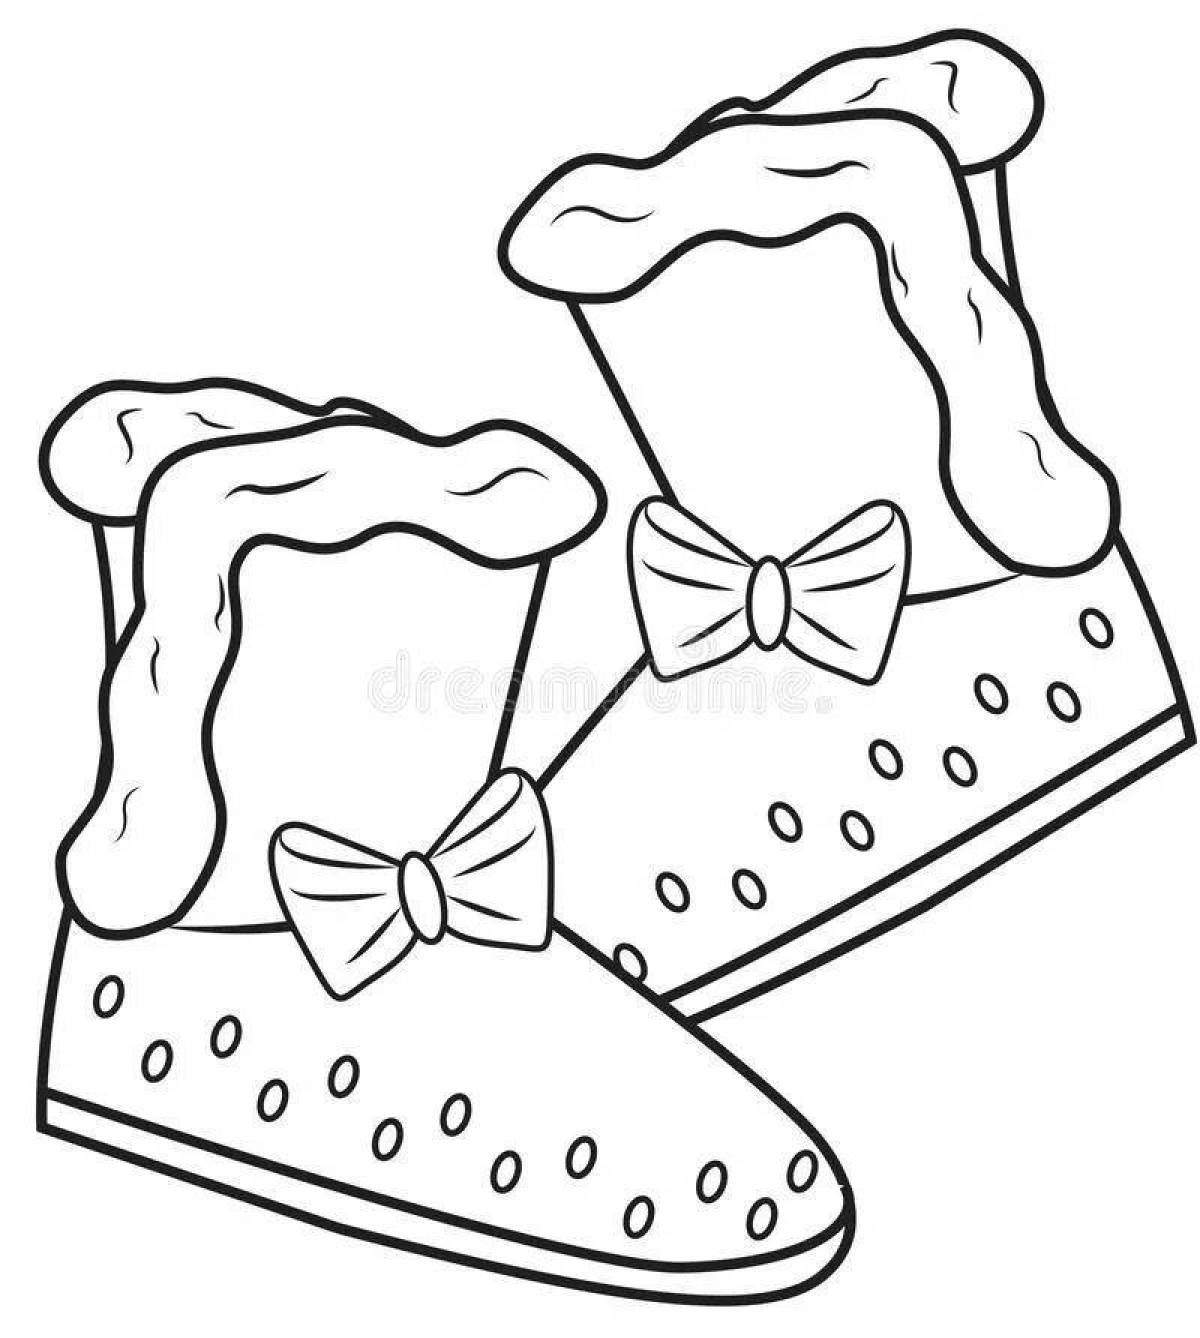 Coloring page shiny winter shoes